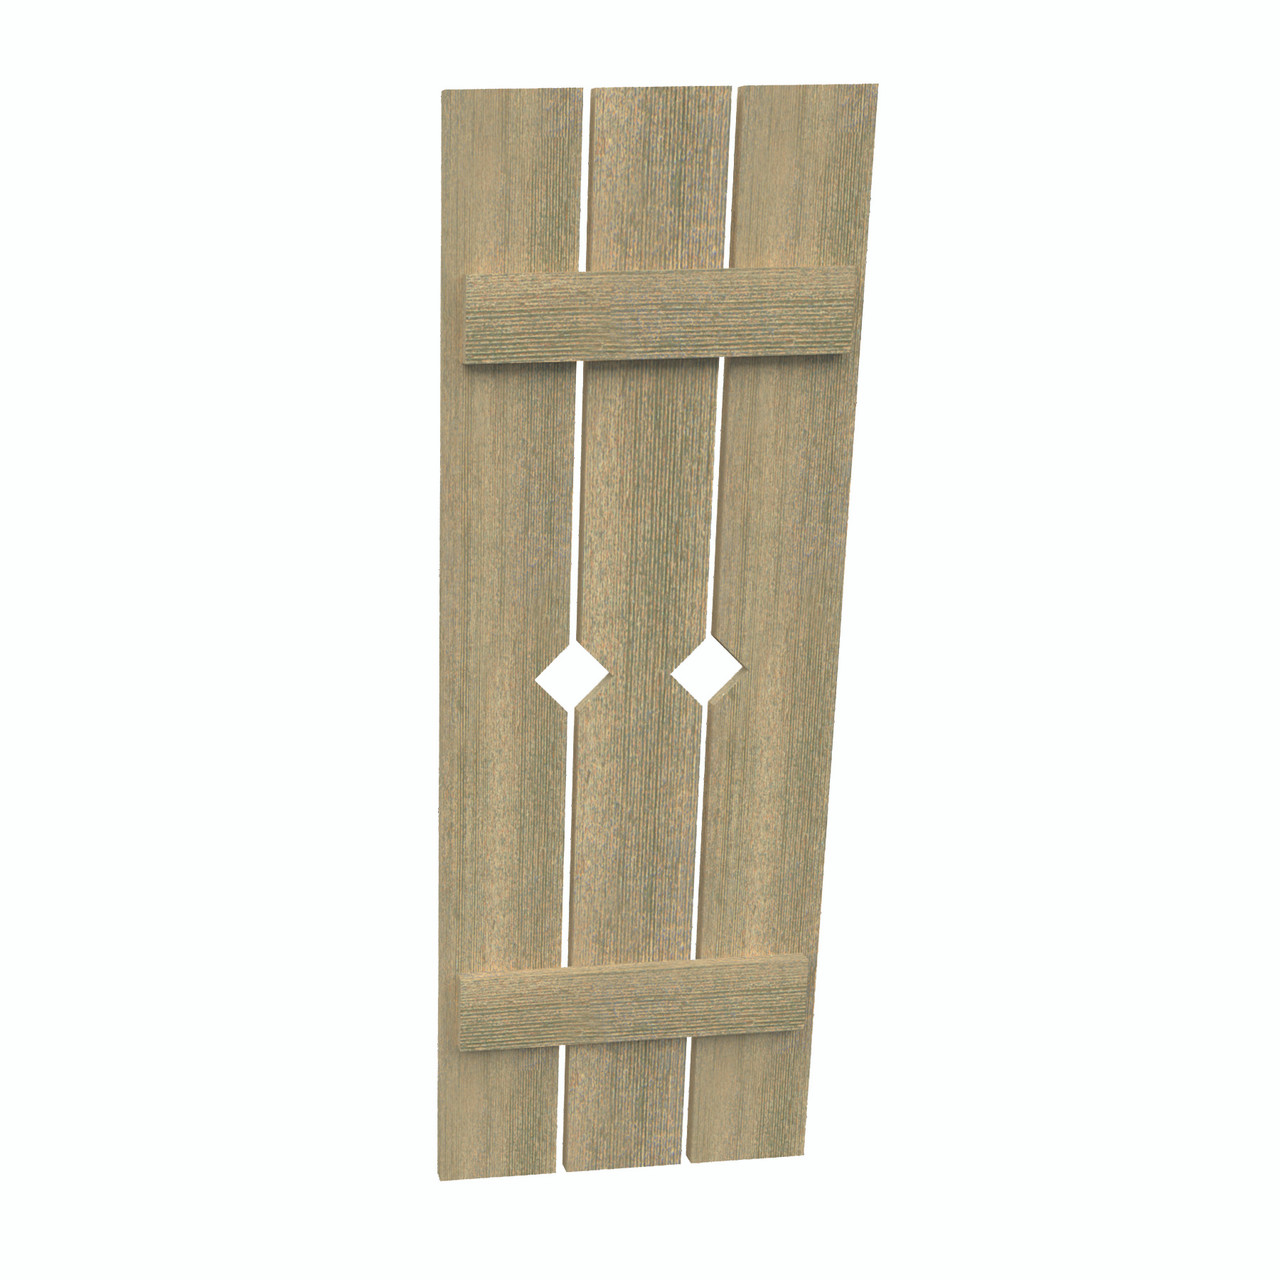 18 inch by 112 inch Plank Shutter with 3-Plank, Diamond